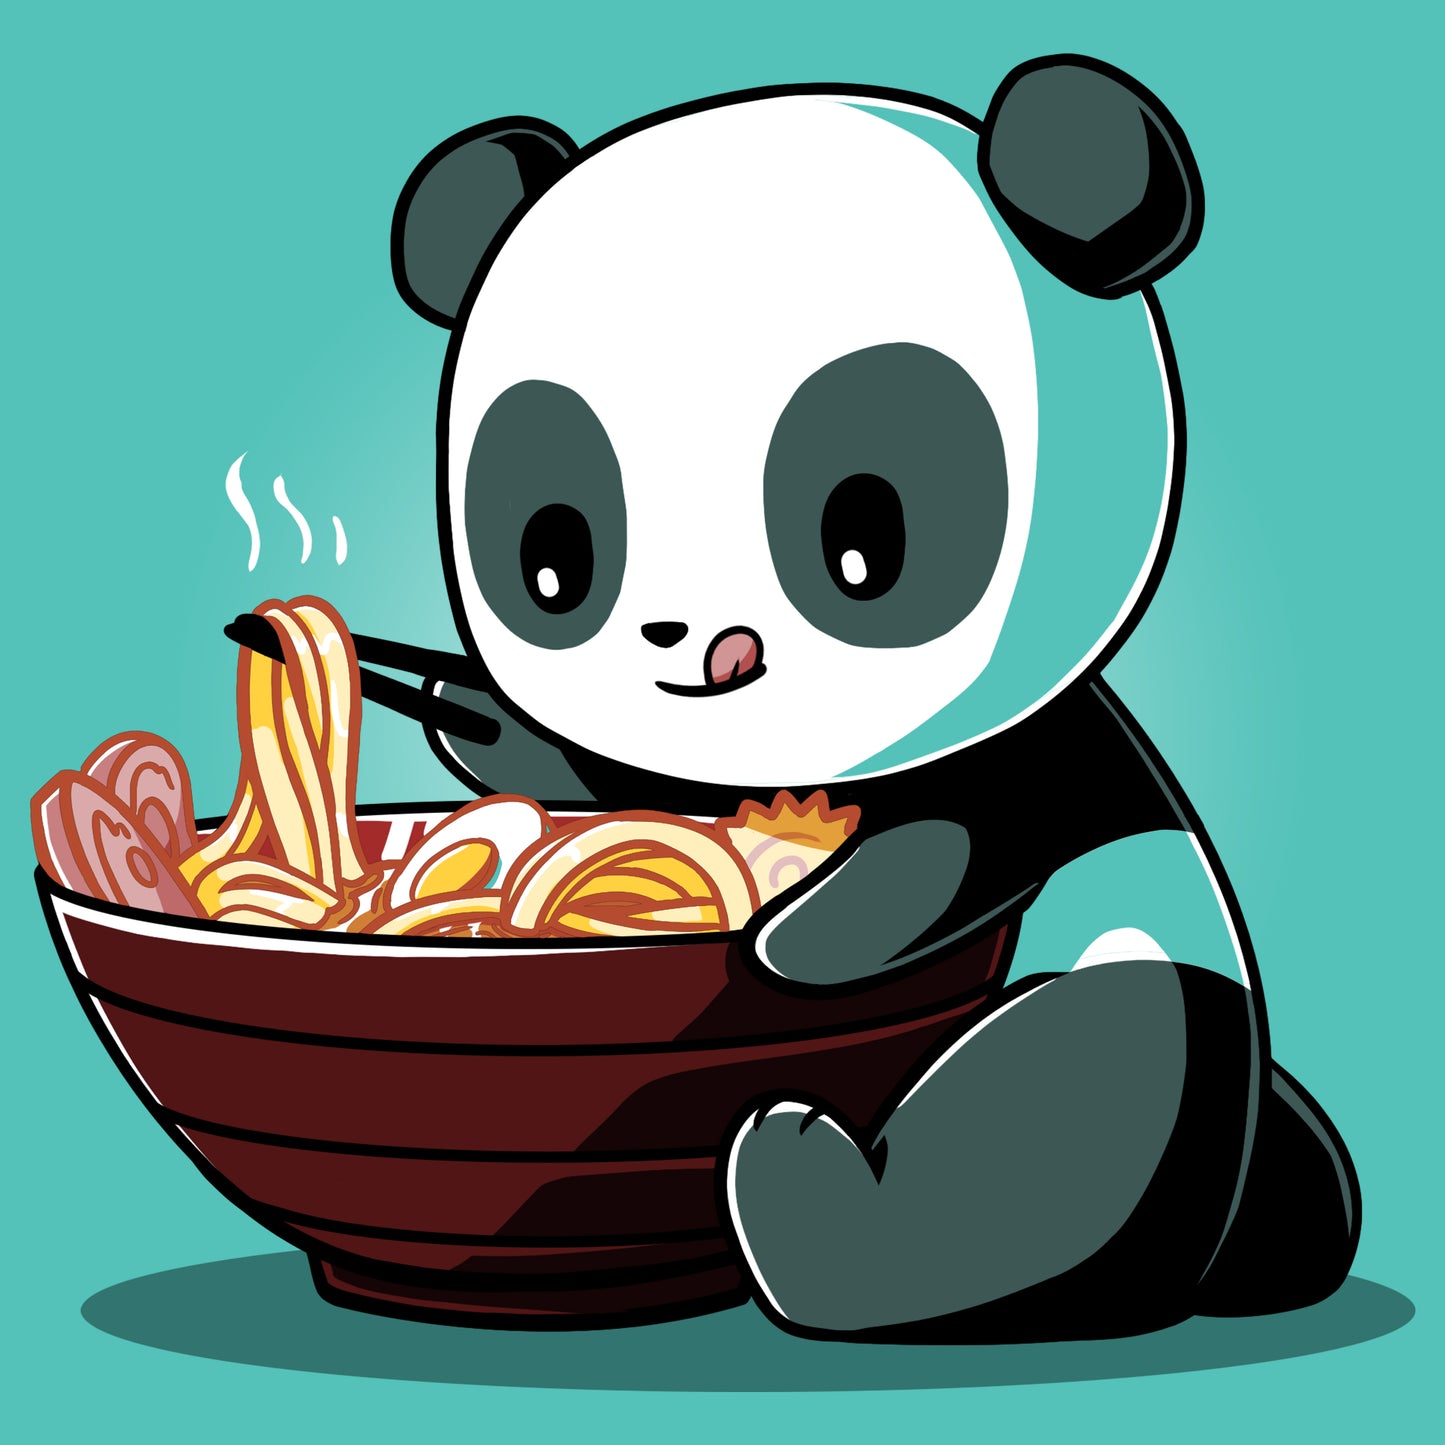 Illustration of a Ramen Panda eating noodles from a large bowl with chopsticks in its right hand, set against a teal background on a Caribbean Blue T-shirt by monsterdigital.